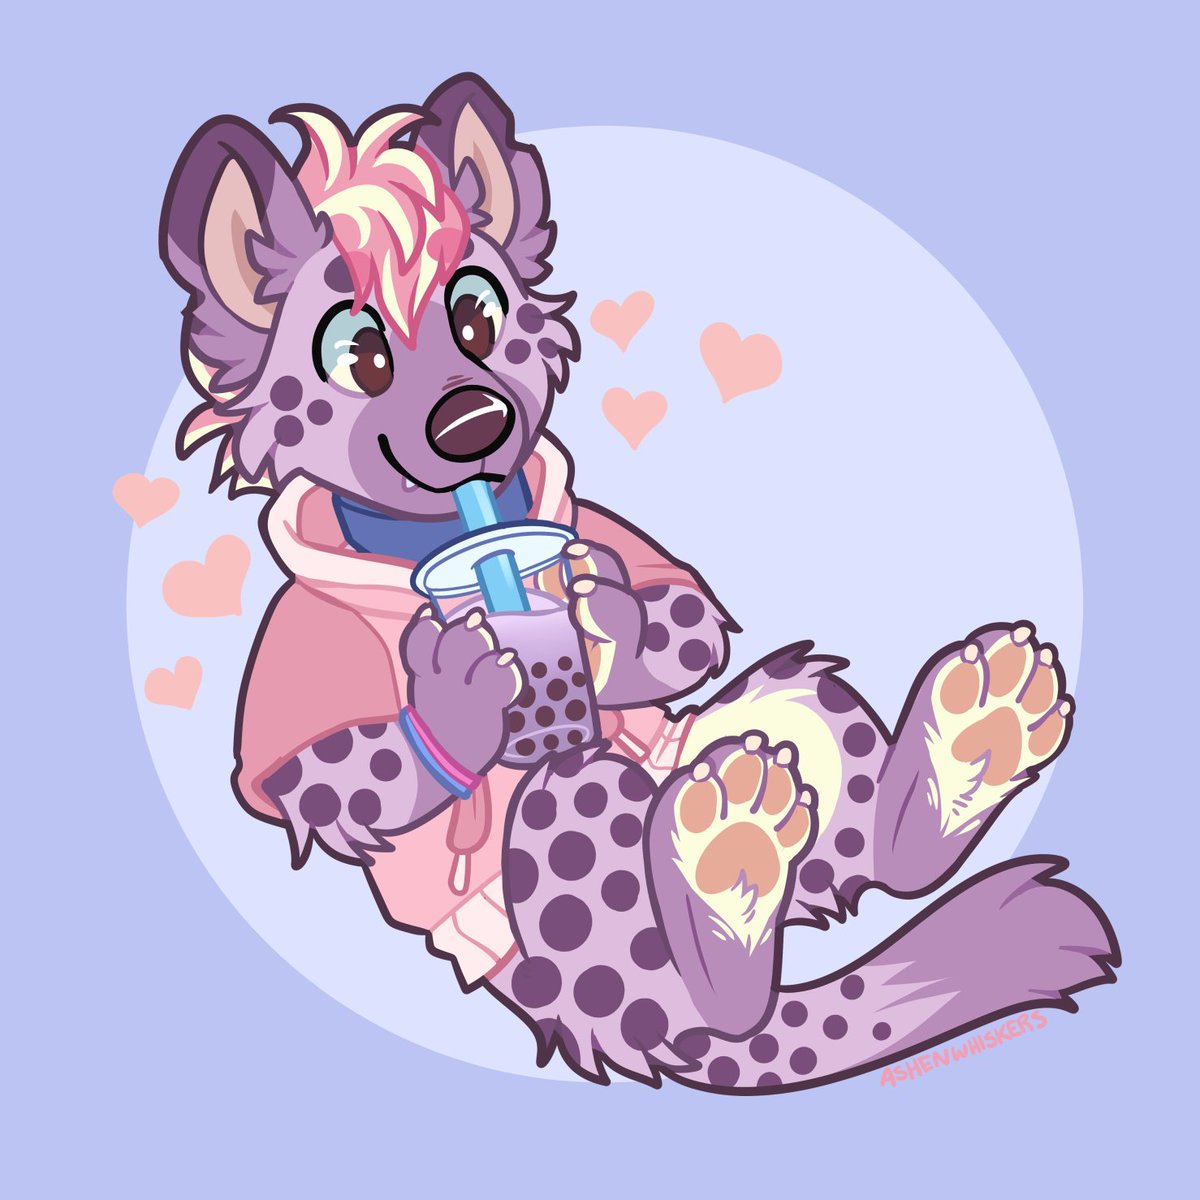 Boba yeen! You are what you eat I guess??